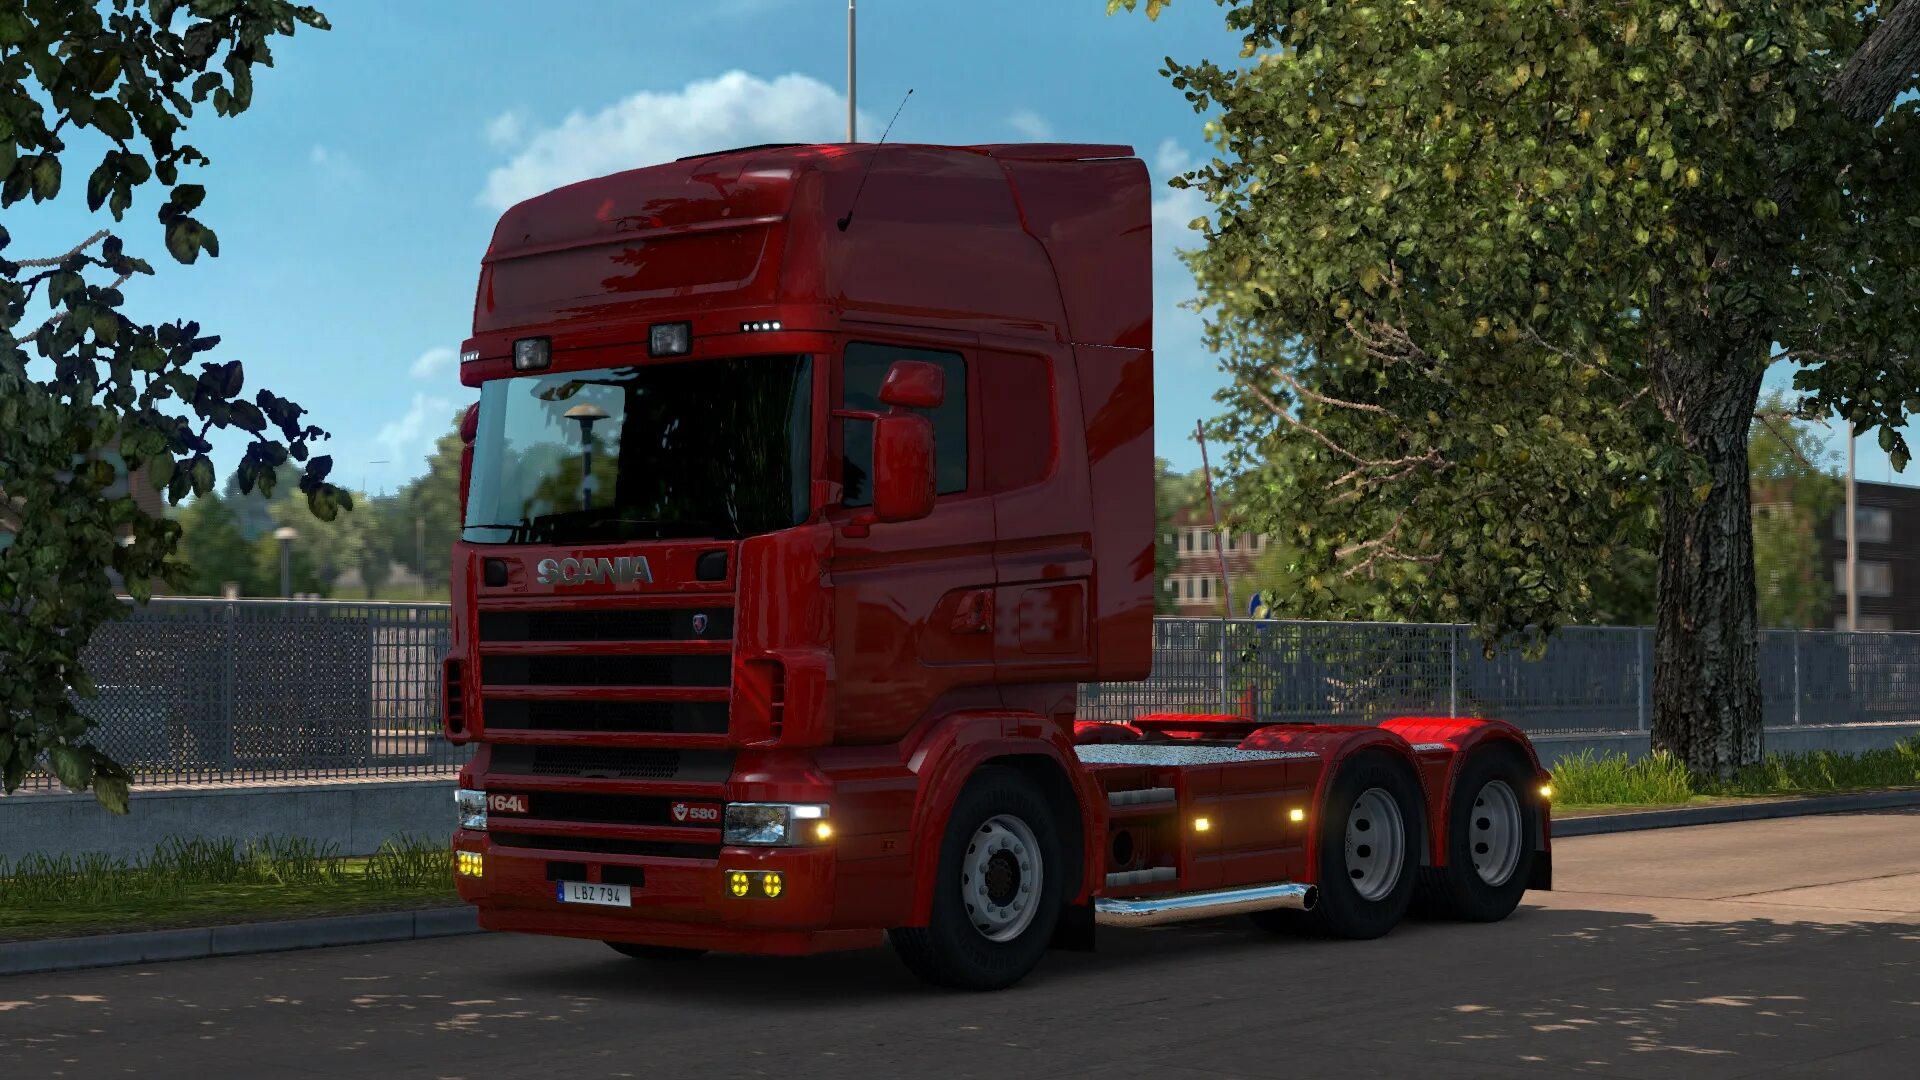 Scania 2 series. Scania r4 Series. Scania r ETS 2. Scania 4 Series. Scania 144 ets2.